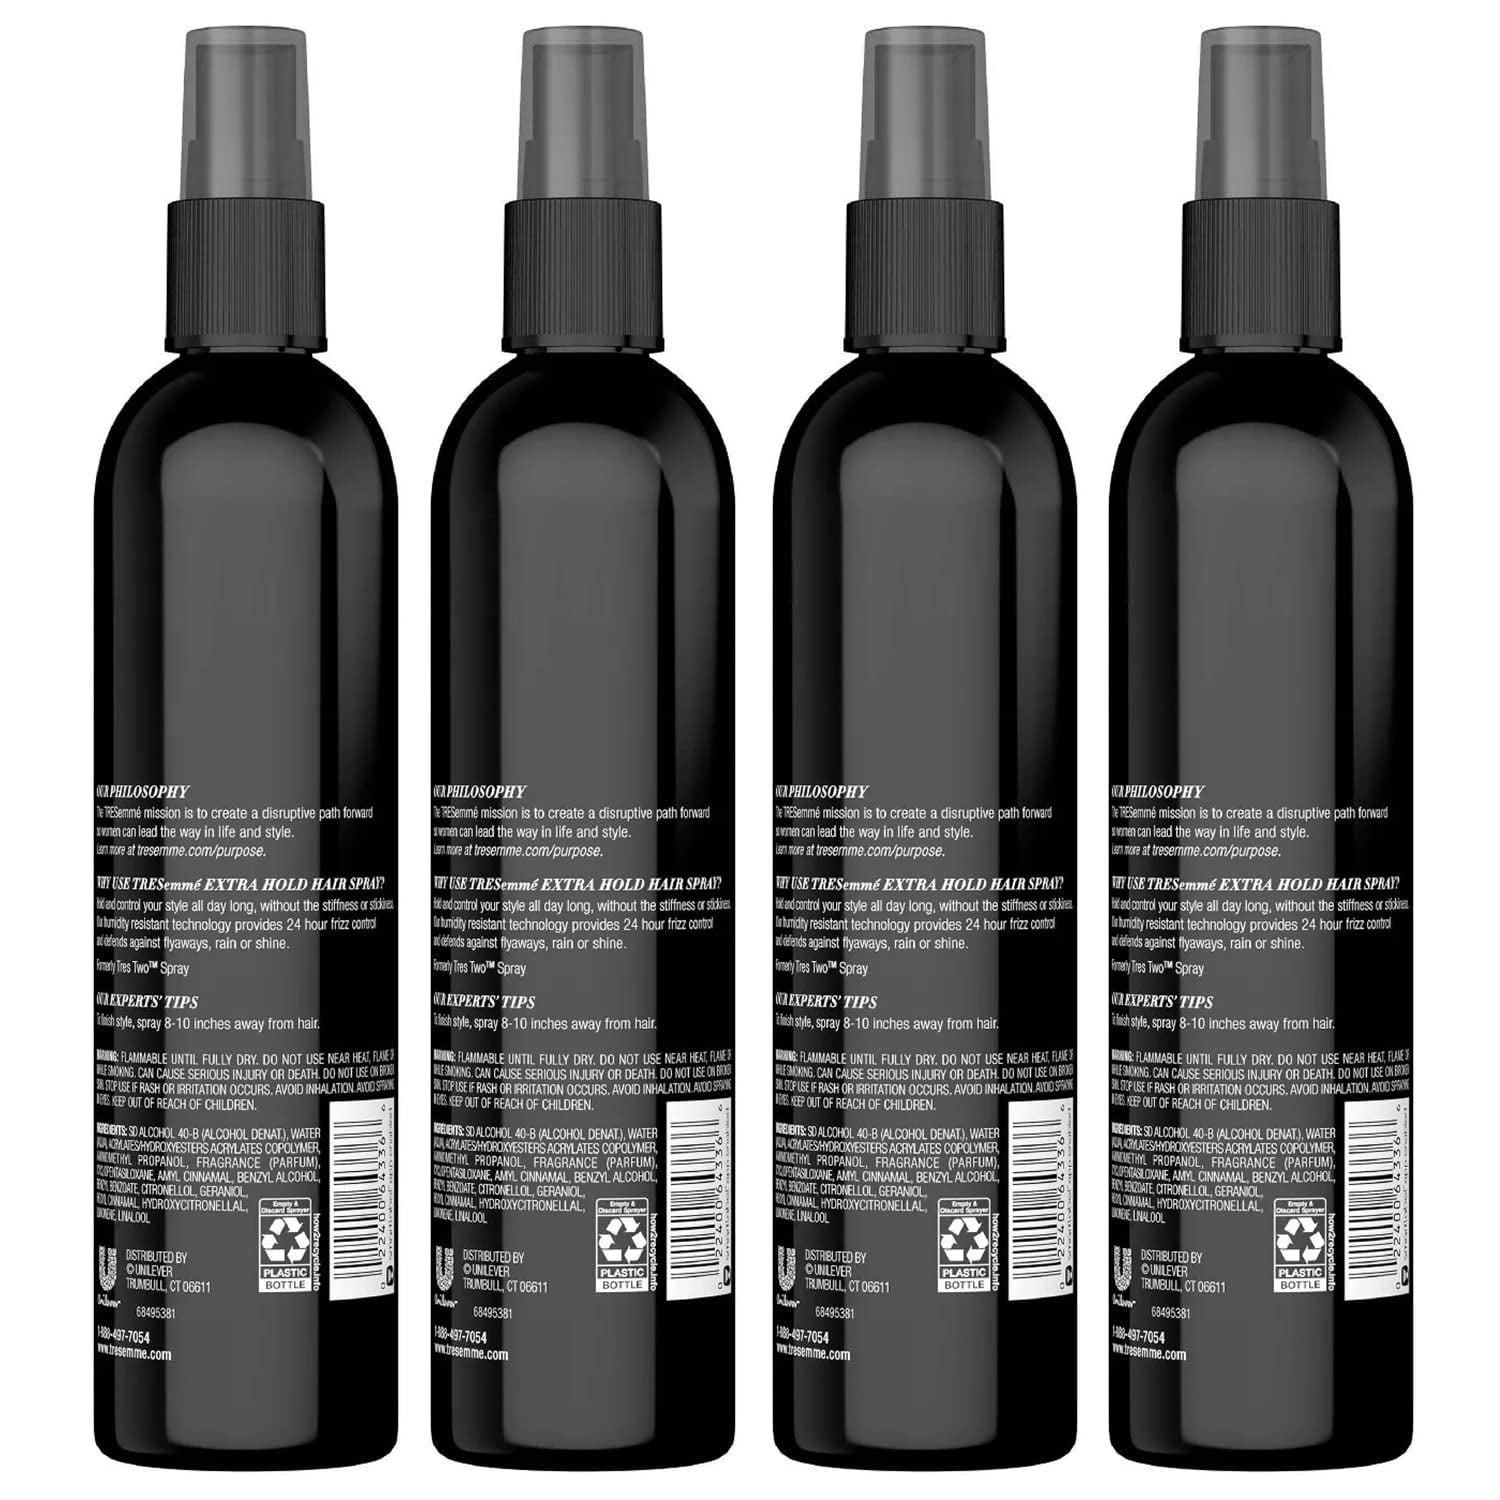 Save on TRESemme Tres Two Spray Extra Firm Control Unscented Aerosol Order  Online Delivery